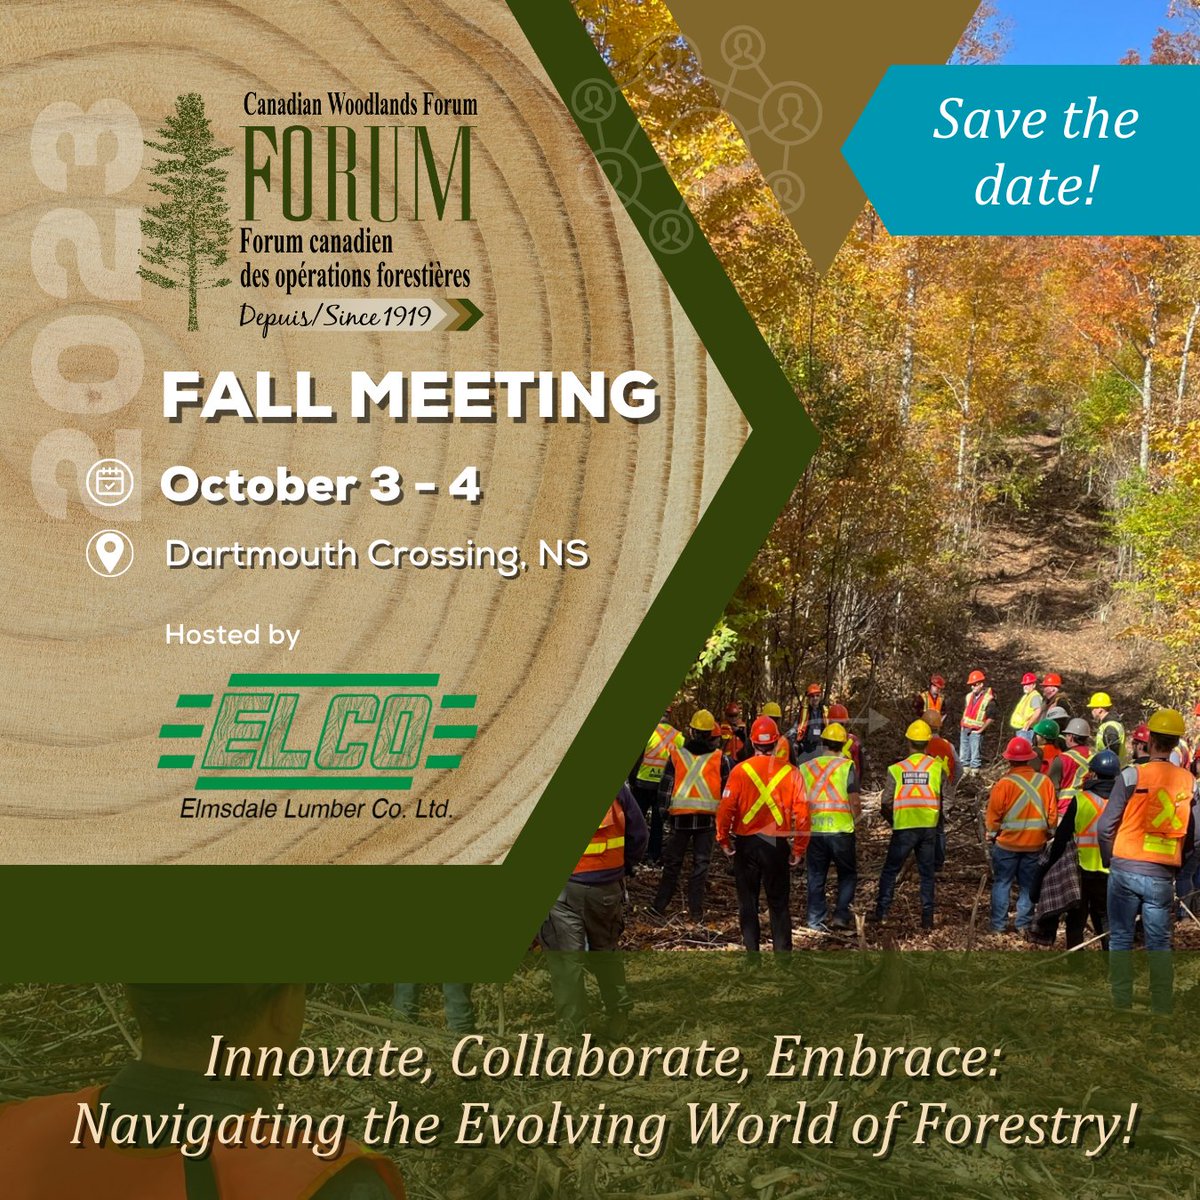 Prepare for a unique experience! Save the date and embrace the future at the CWF Fall Meeting.
Watch for program and registration details later this summer! #CWF, #Forestindustry, #Forestcontractor, #Forestry